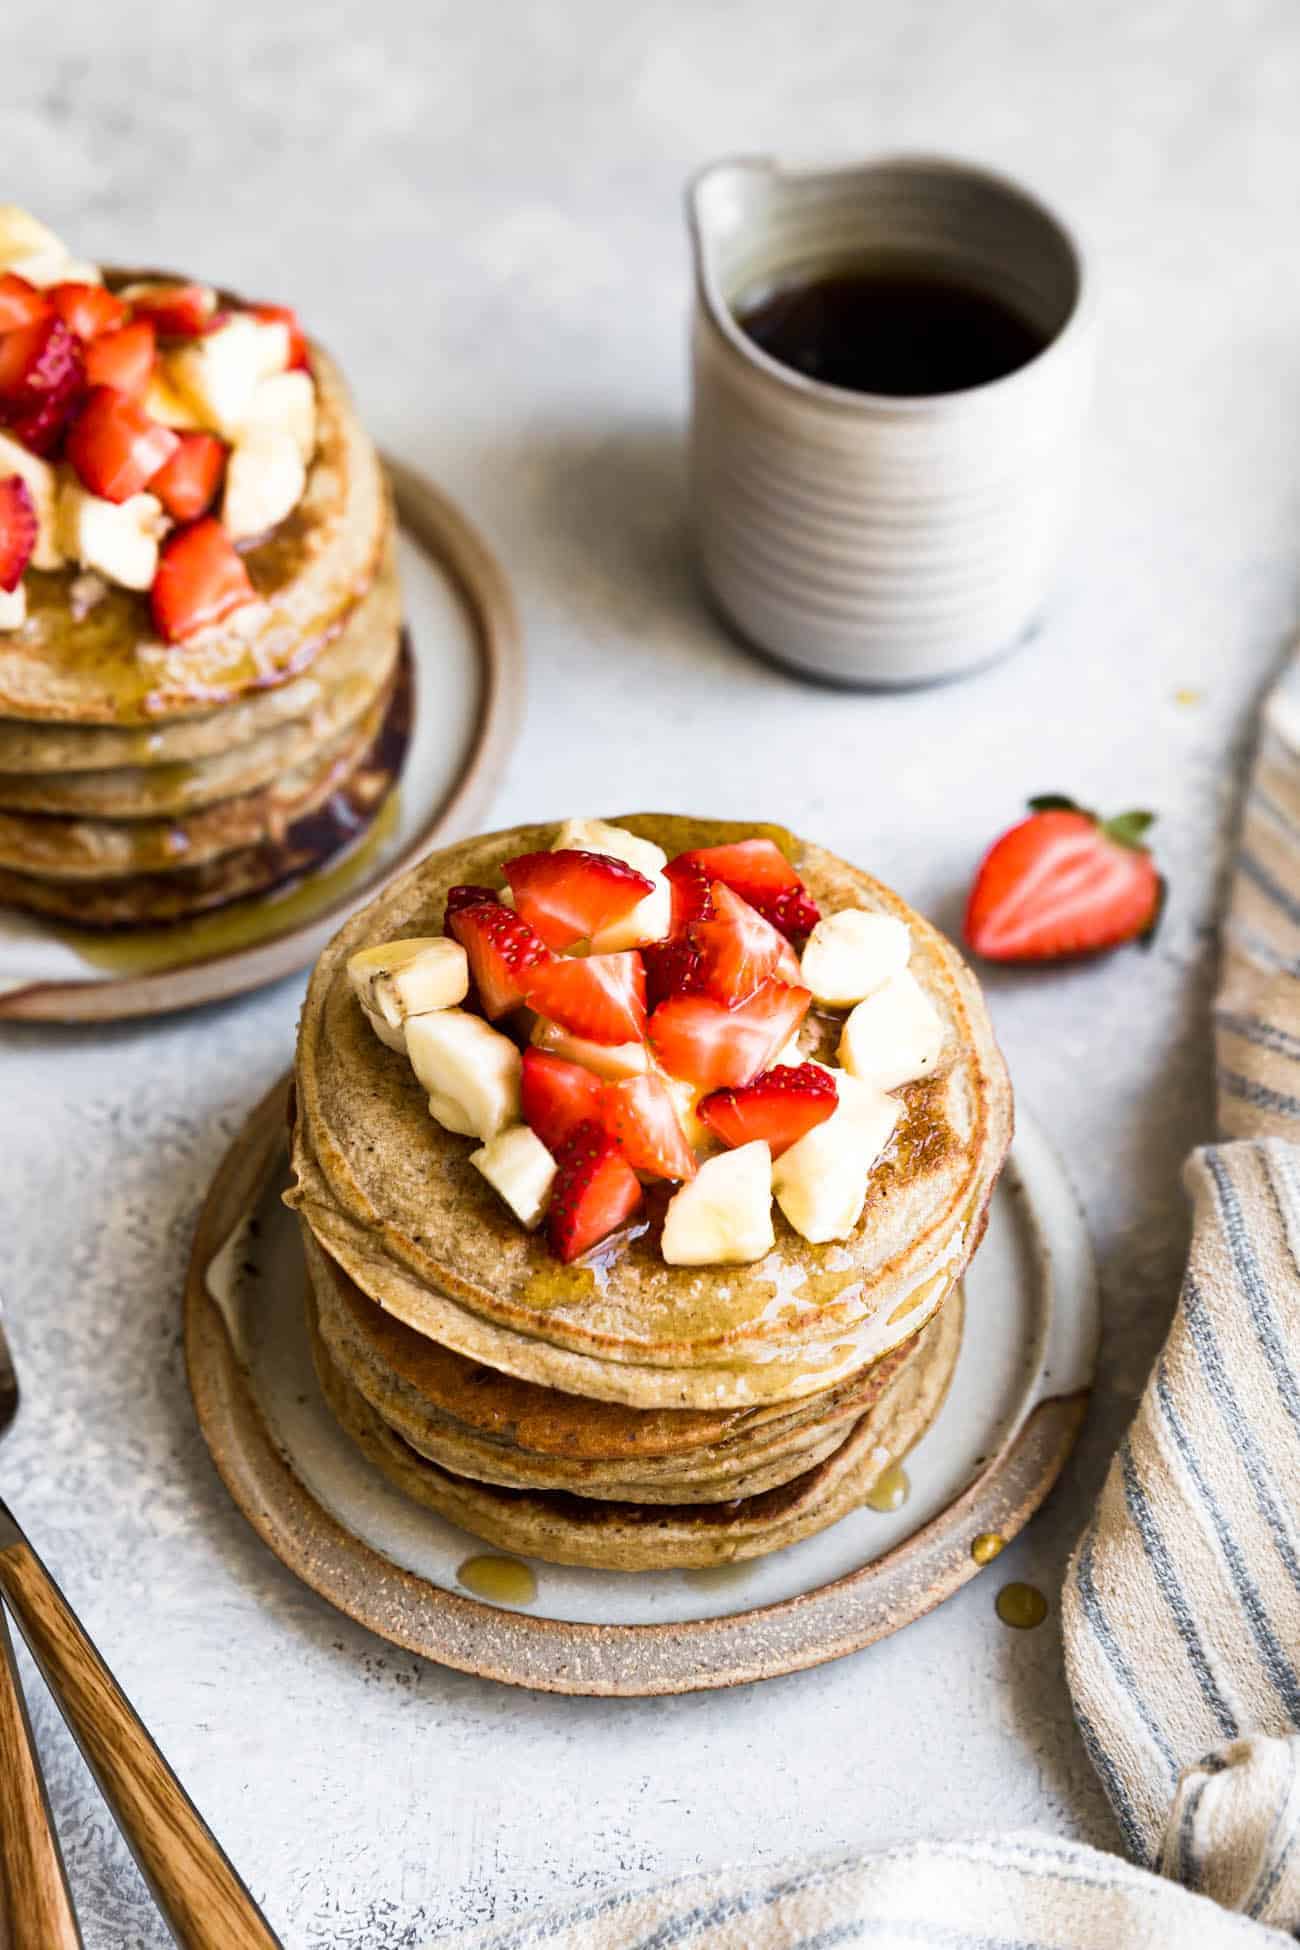 banana oatmeal pancakes on ceramic plates with strawberries, bananas and syrup